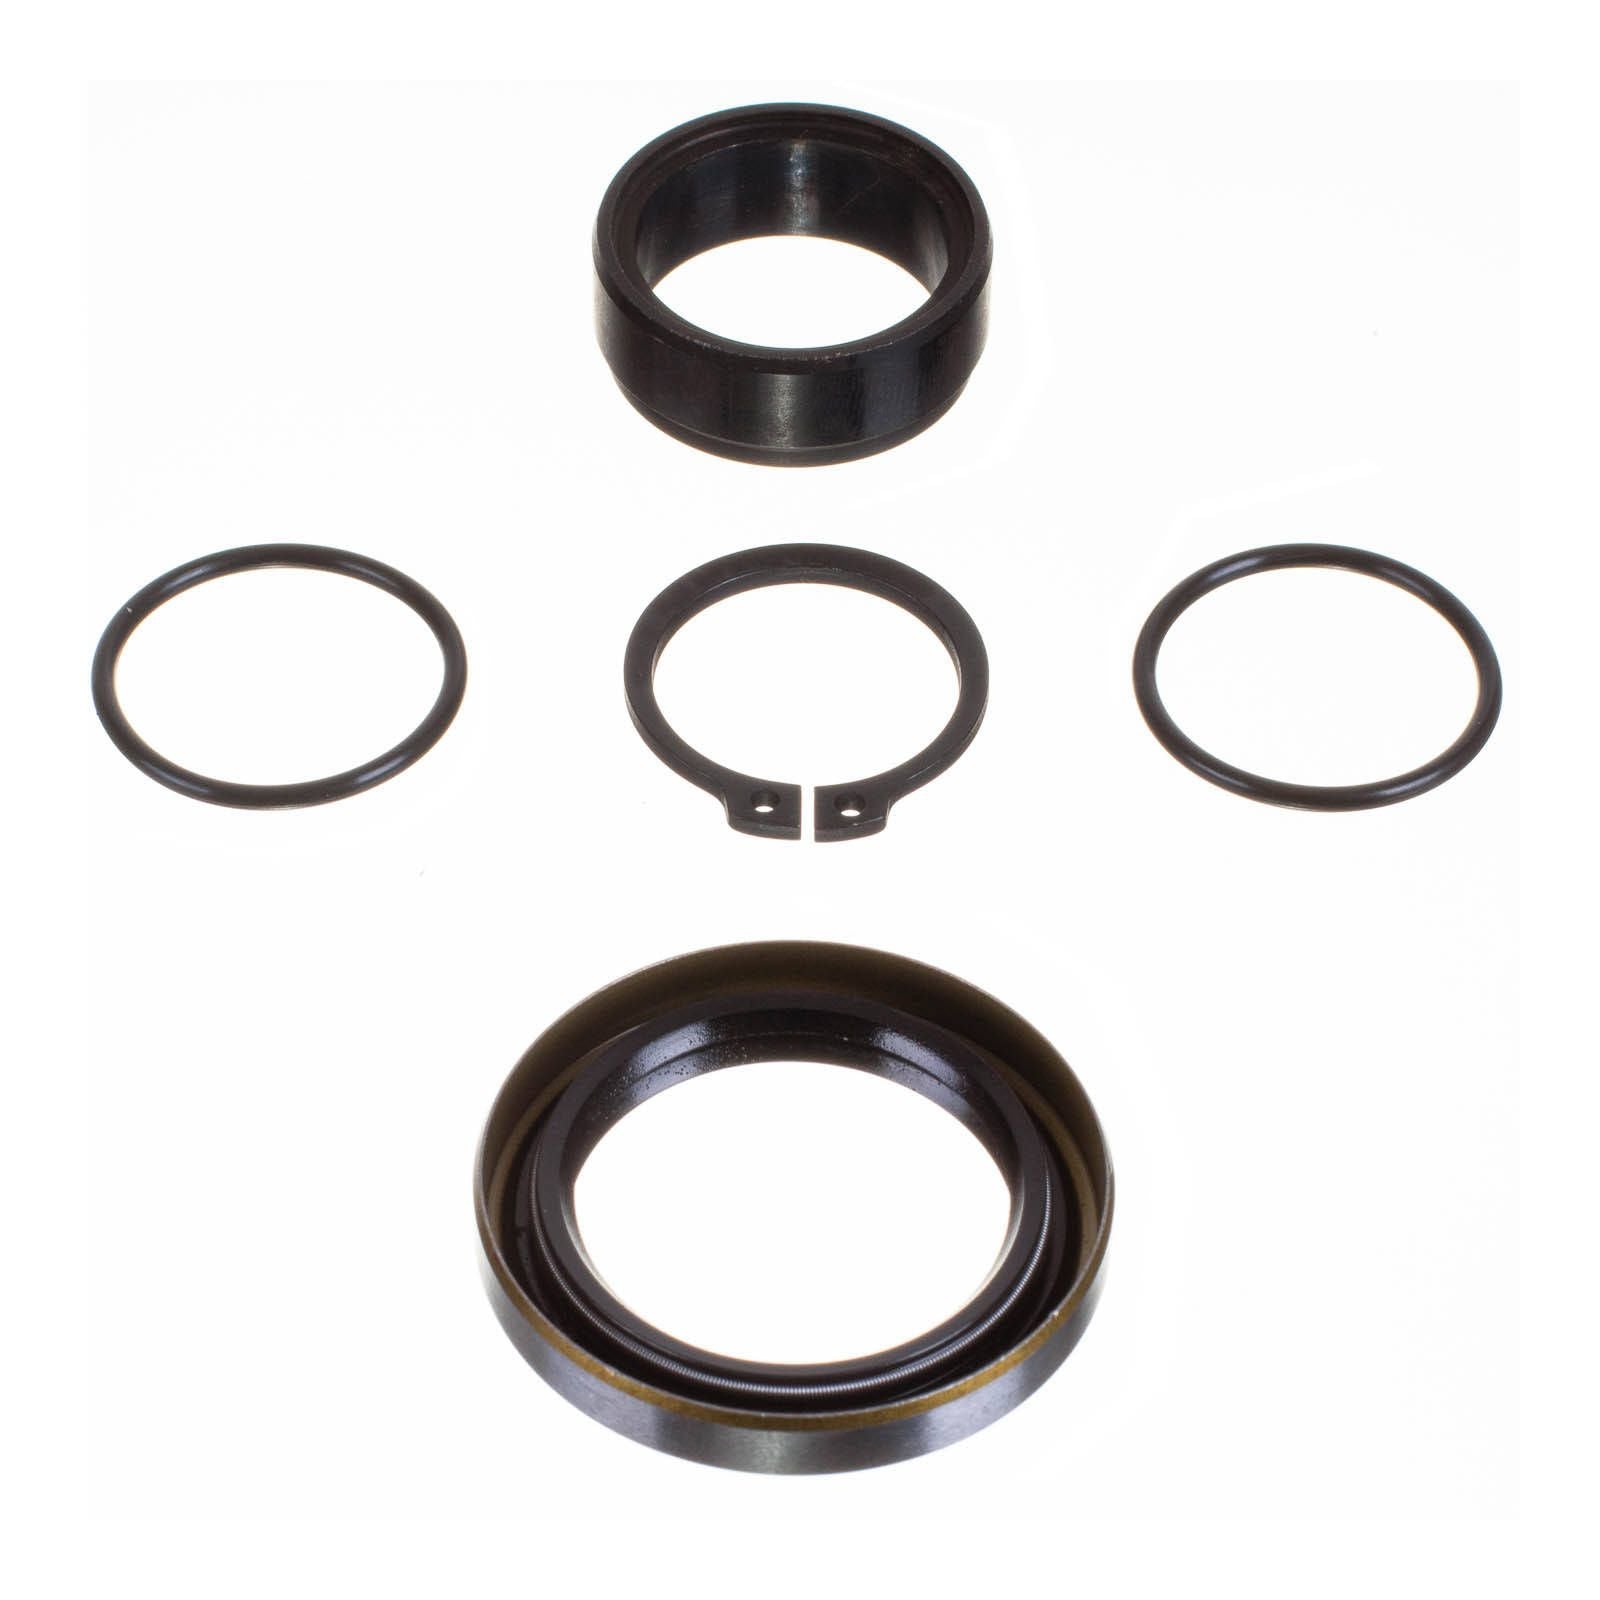 New ALL BALLS Racing Counter Shaft Seal Kit For KTM SX 125 2016 #AB254045